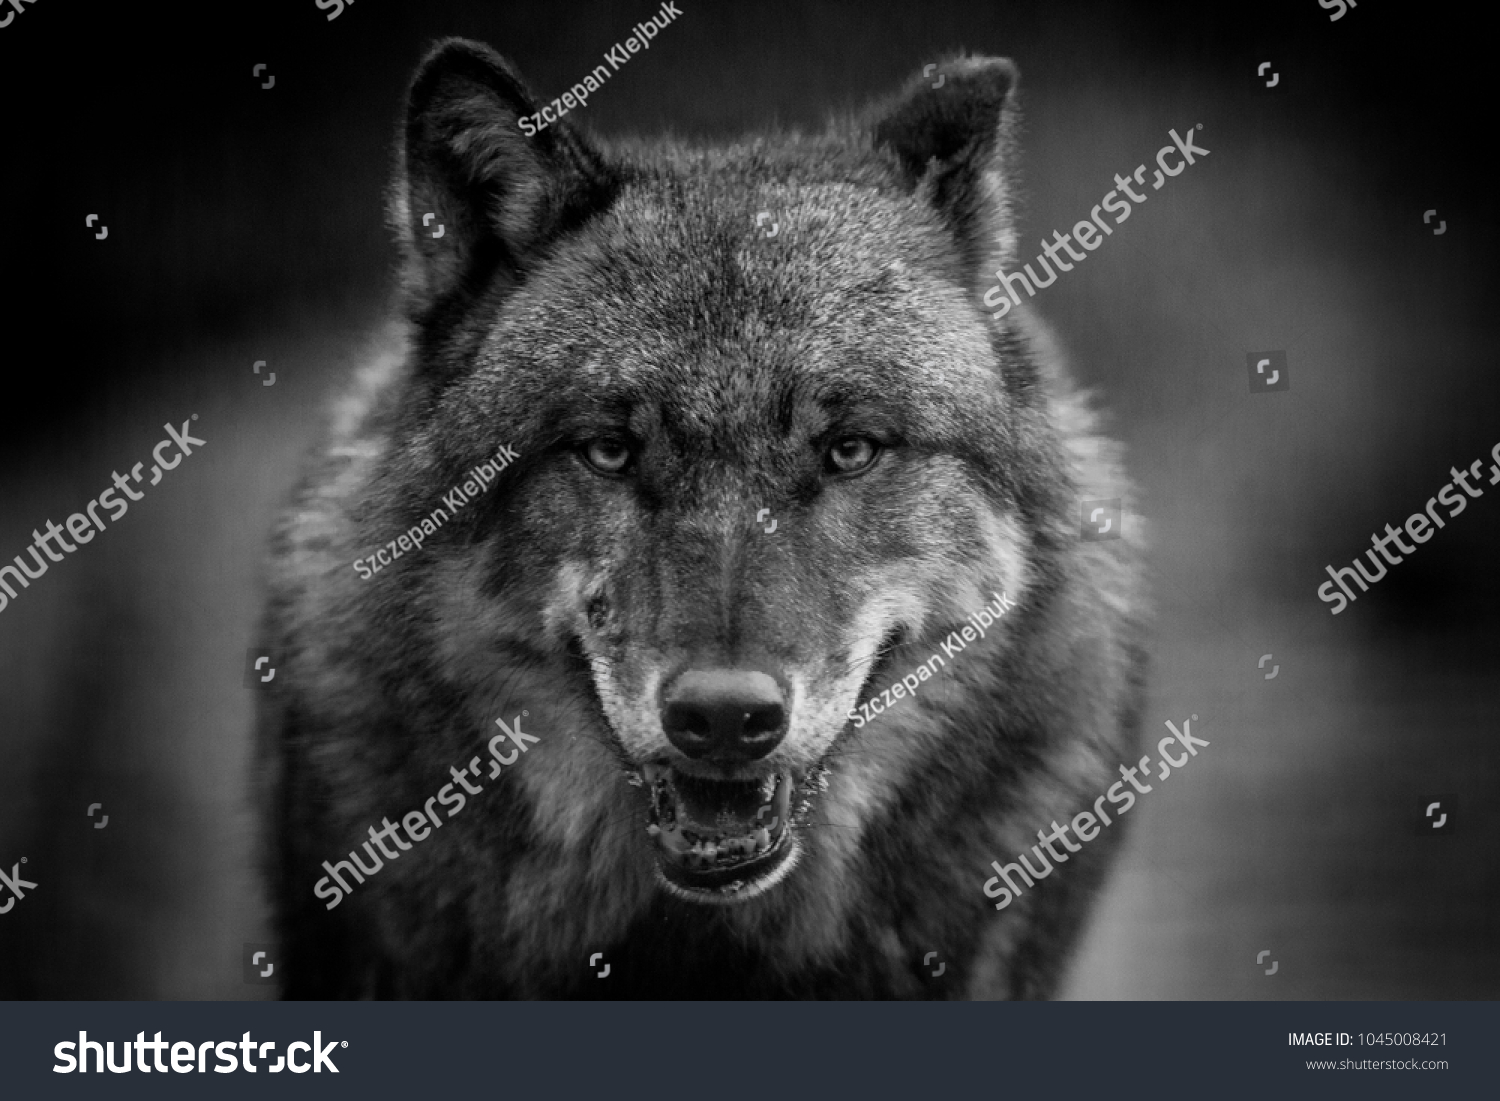 12,011 Wolf scary Images, Stock Photos & Vectors | Shutterstock